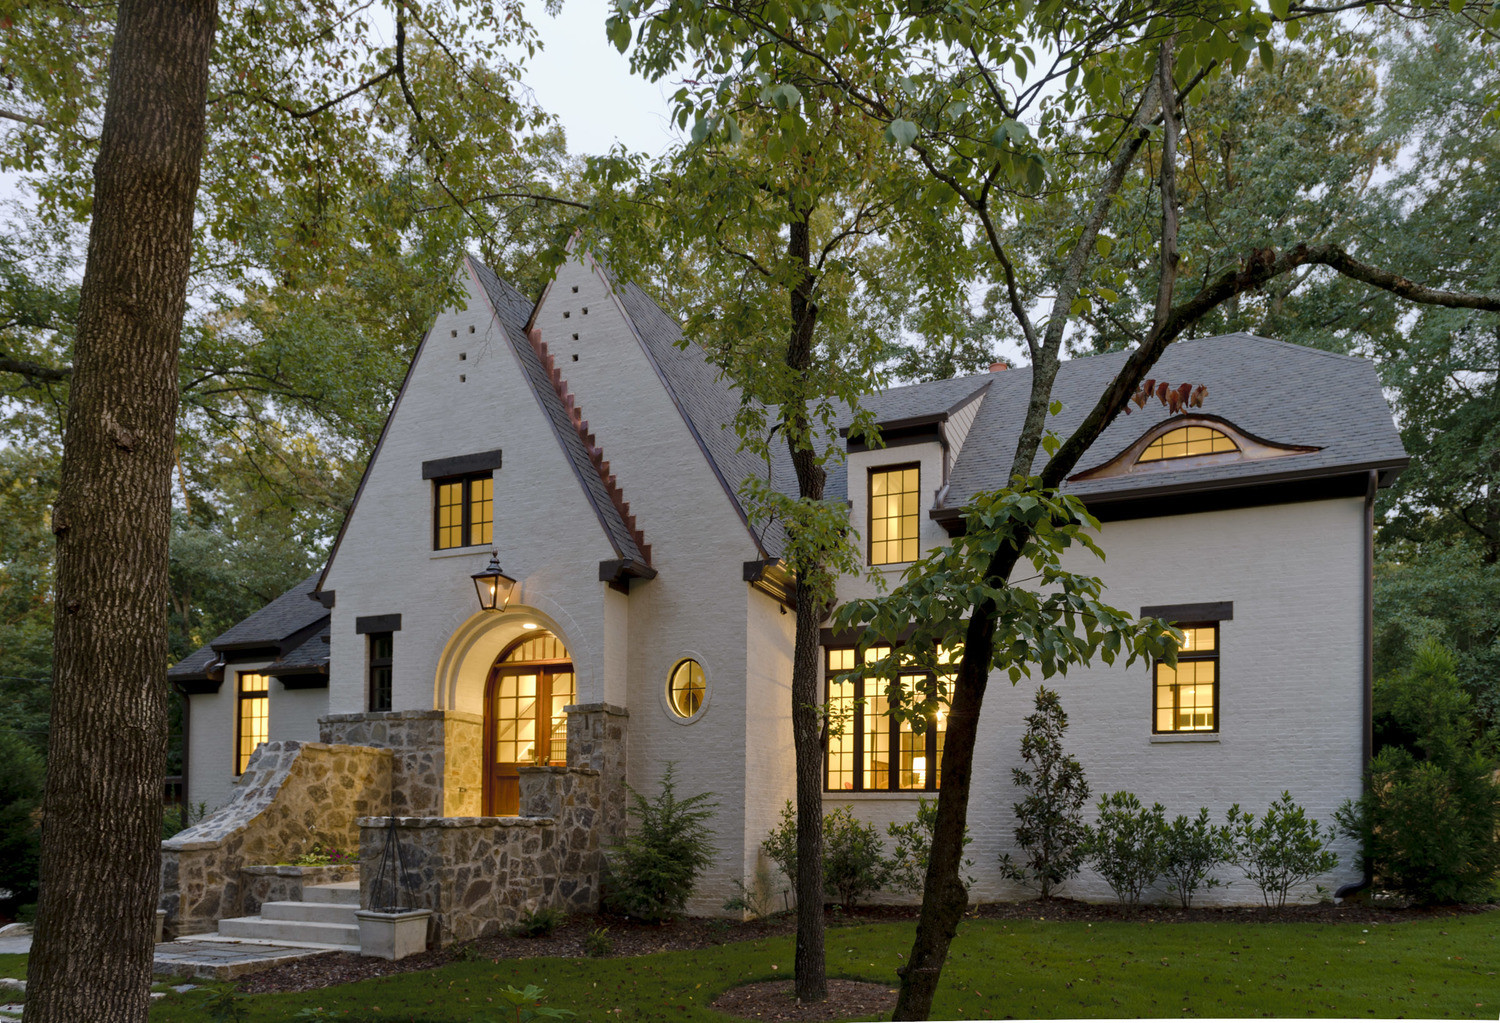 What Is A Cottage Style Home? Elements of Cottage Architecture